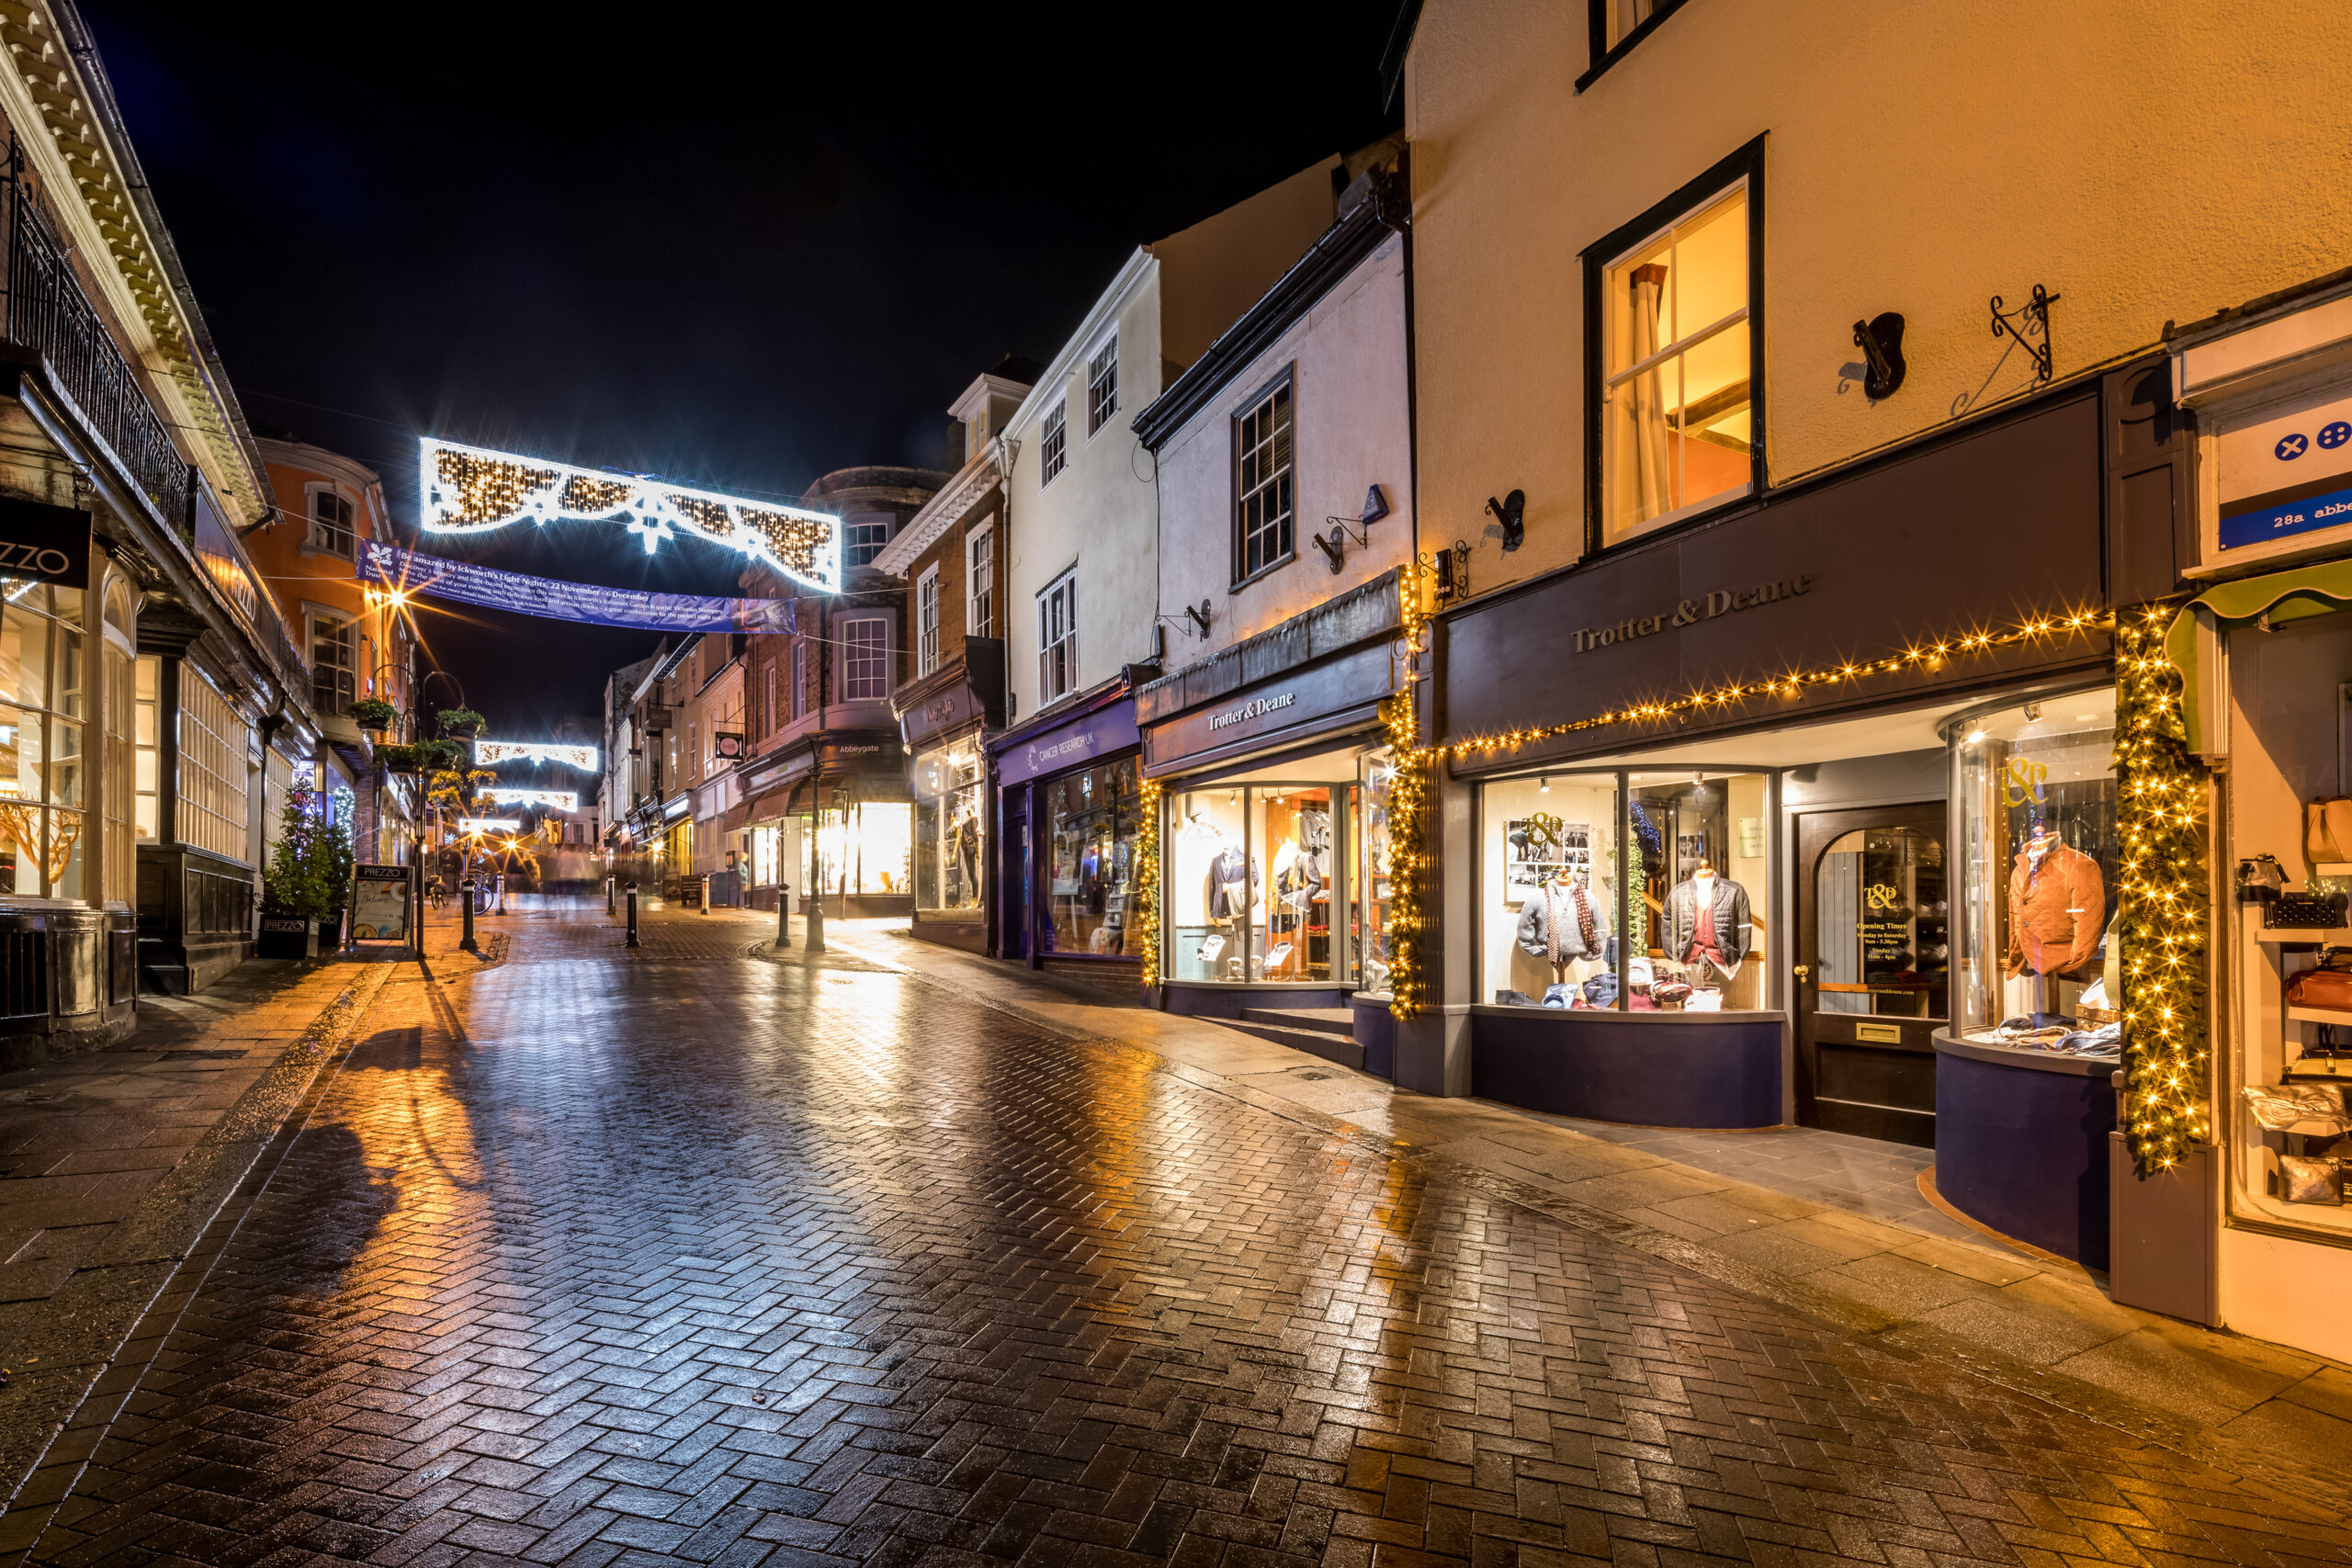 Where to find last minute presents and stocking fillers in Bury St Edmunds